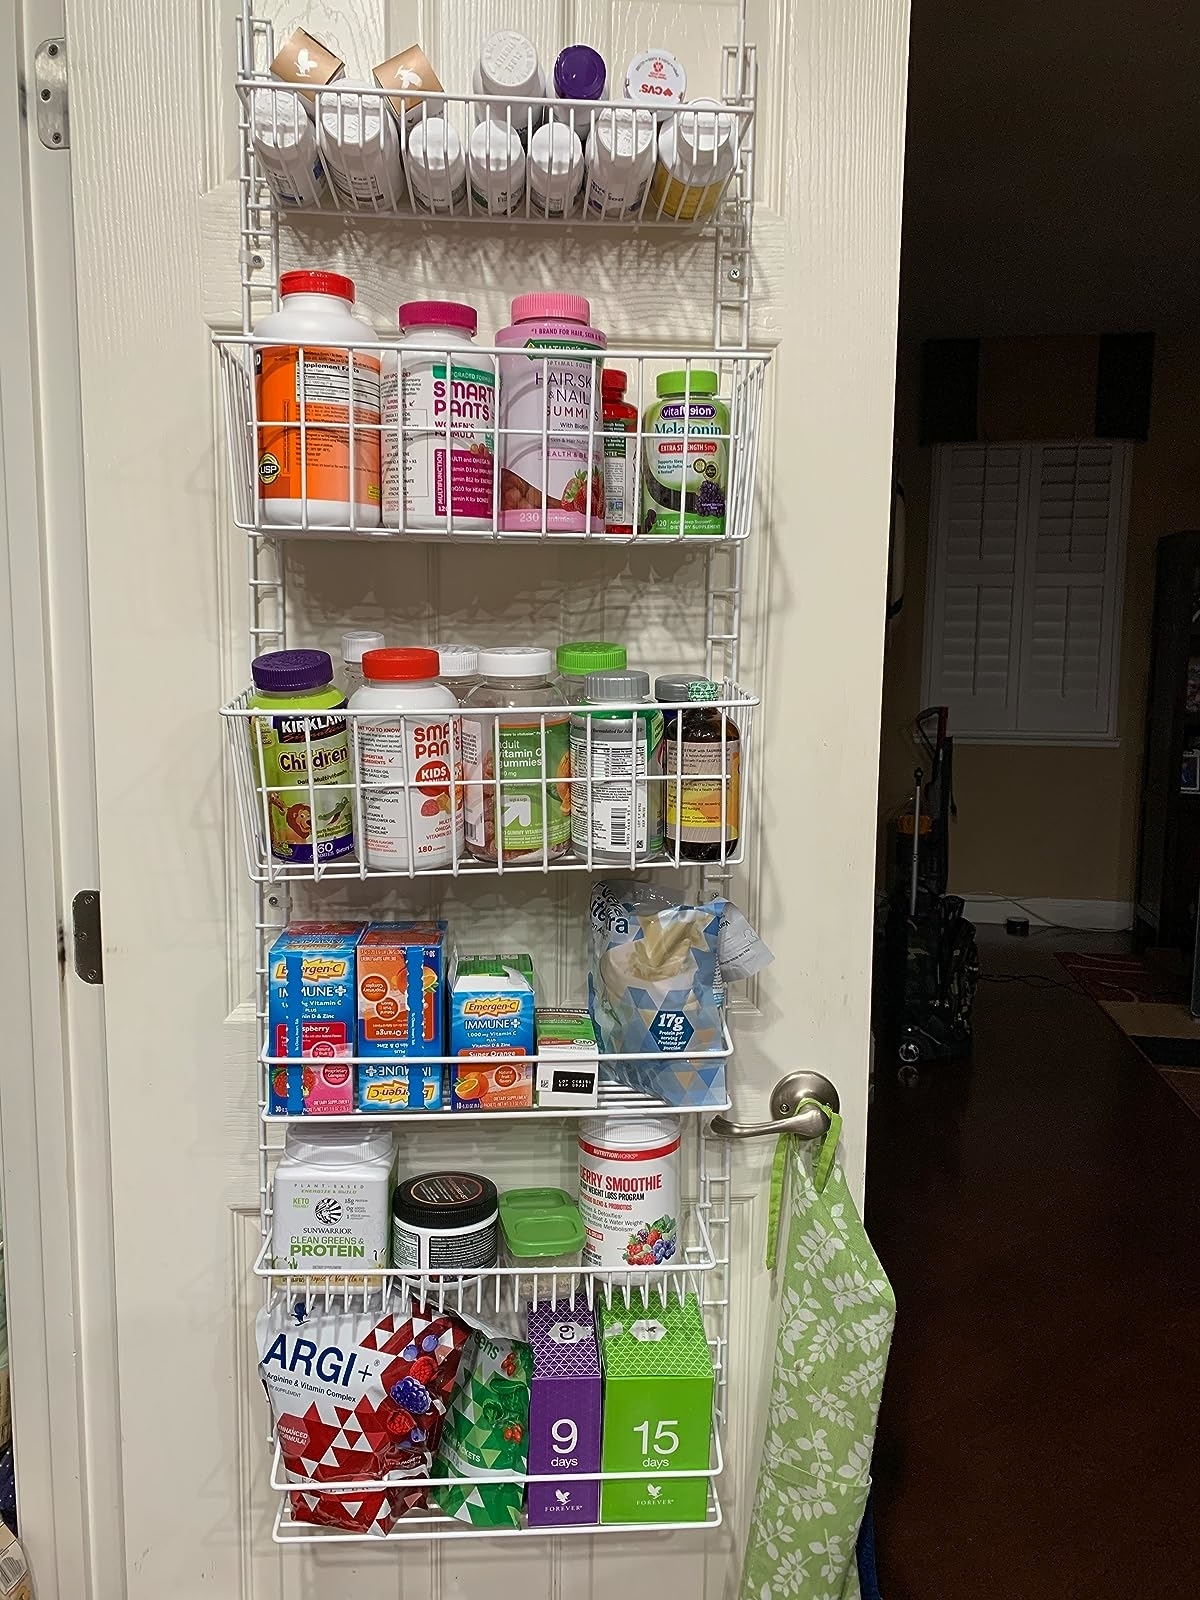 Reviewer image of the organizer filled with vitamins and supplements hanging on the door